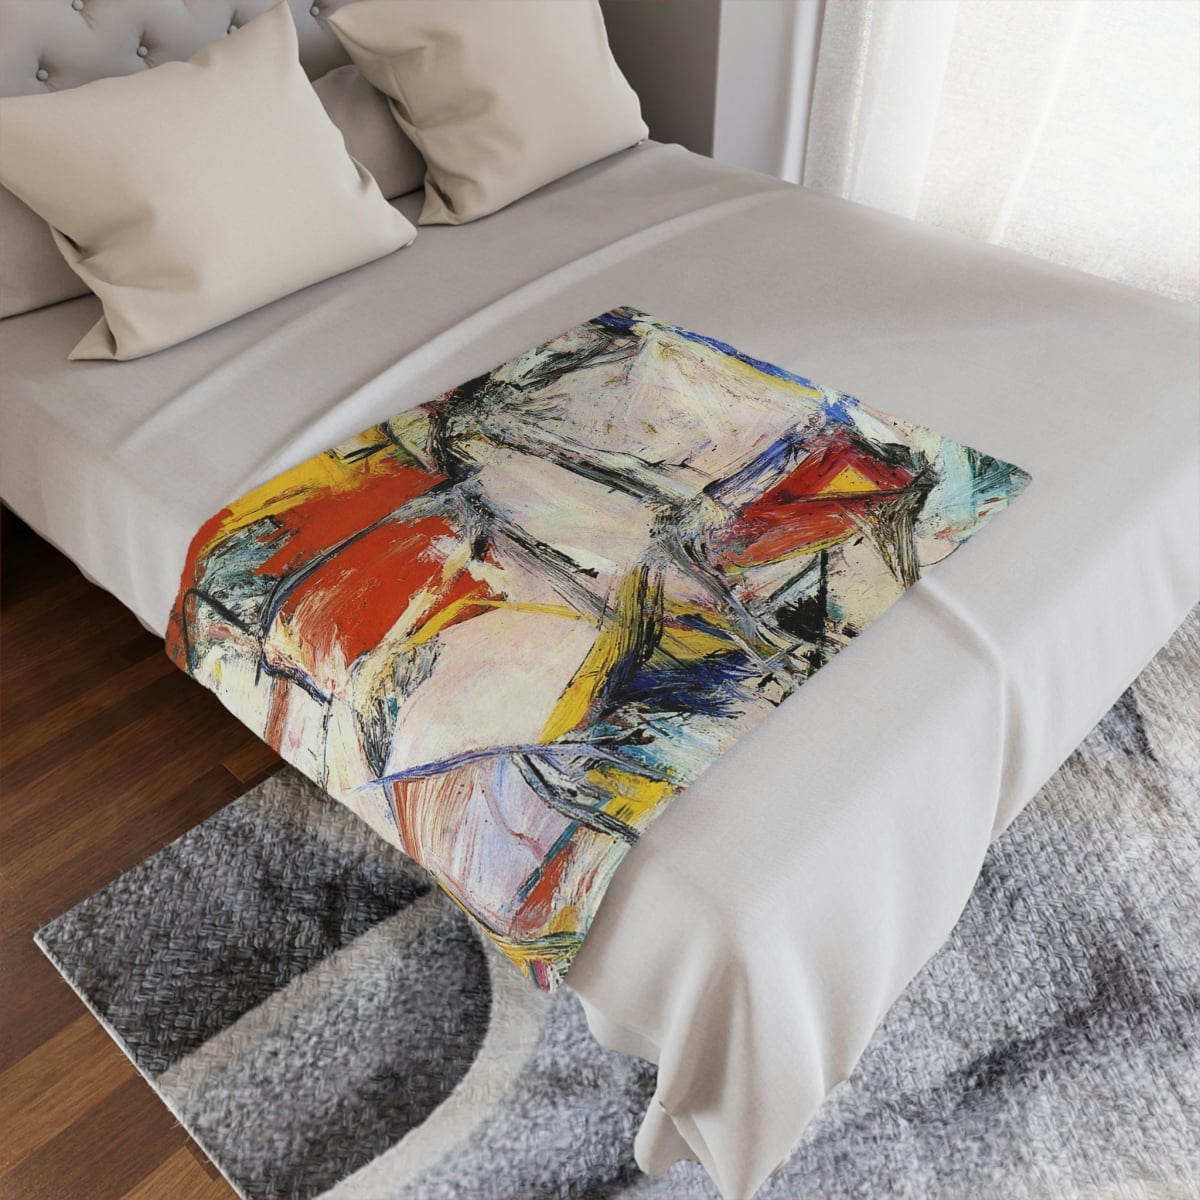 Willem de Kooning's Abstract Expressionism on a Blanket